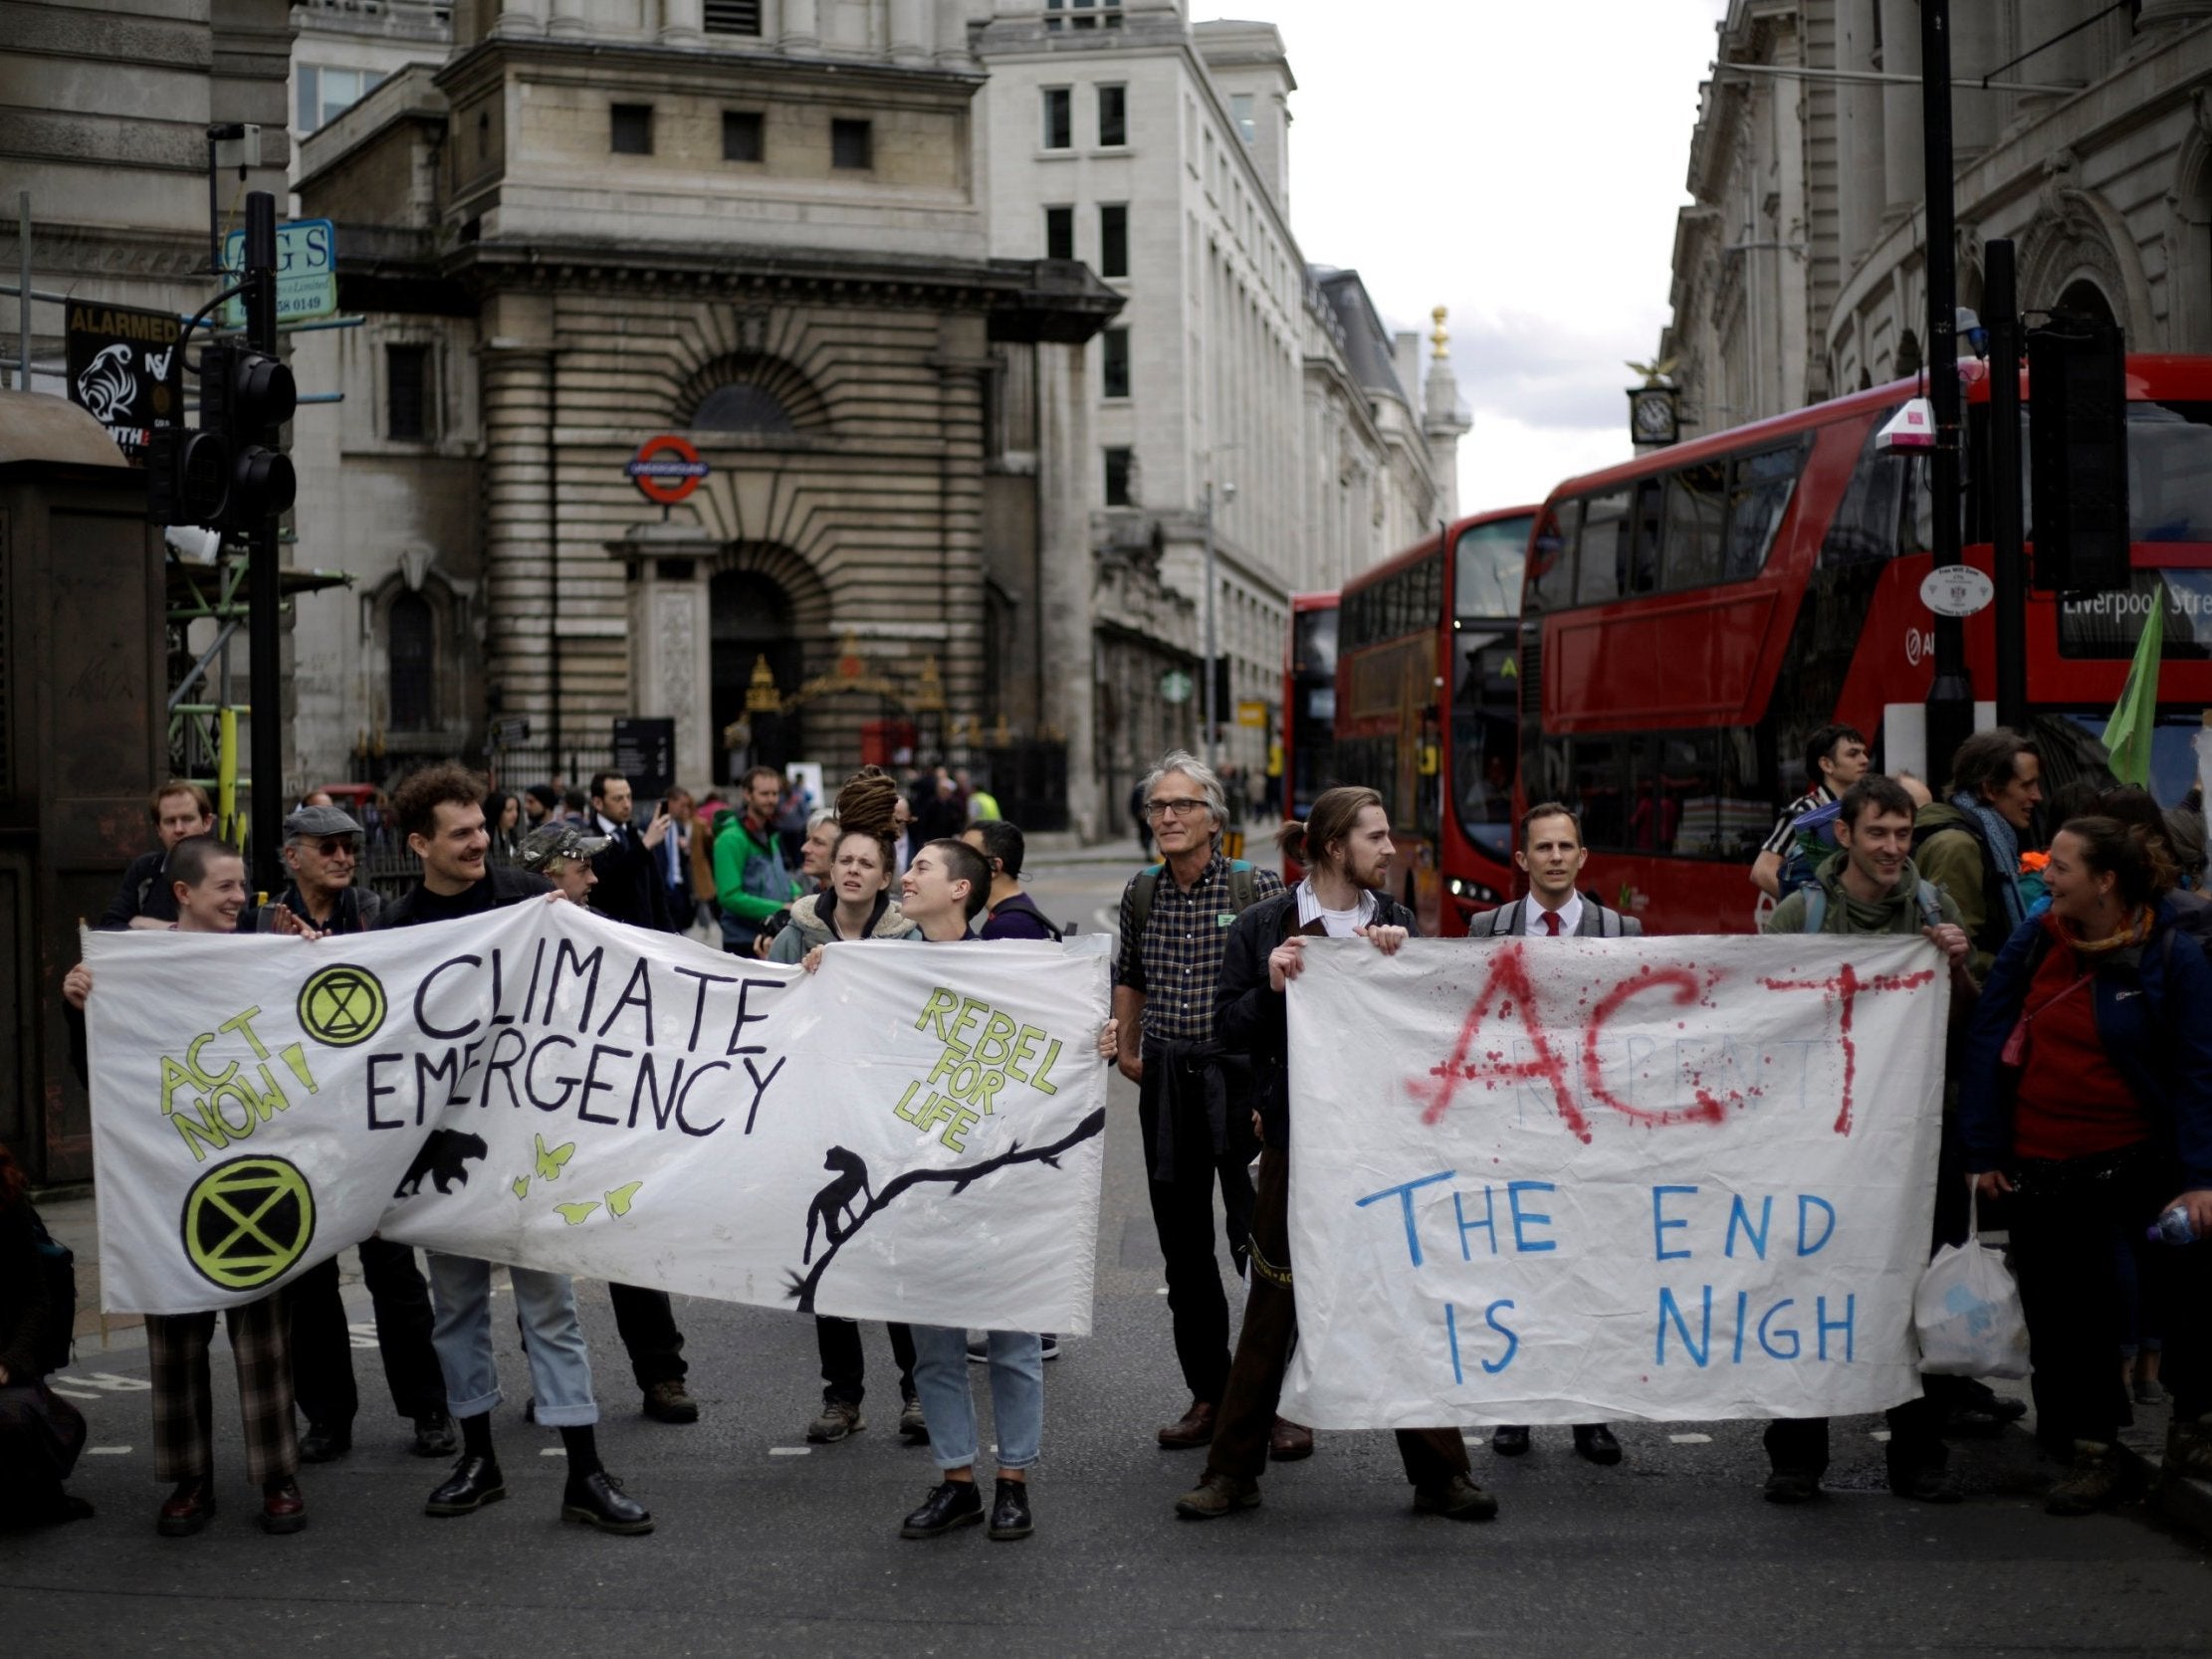 Climate change activists block the road near the Bank of England in the City of London on the final day of the Extinction Rebellion protests